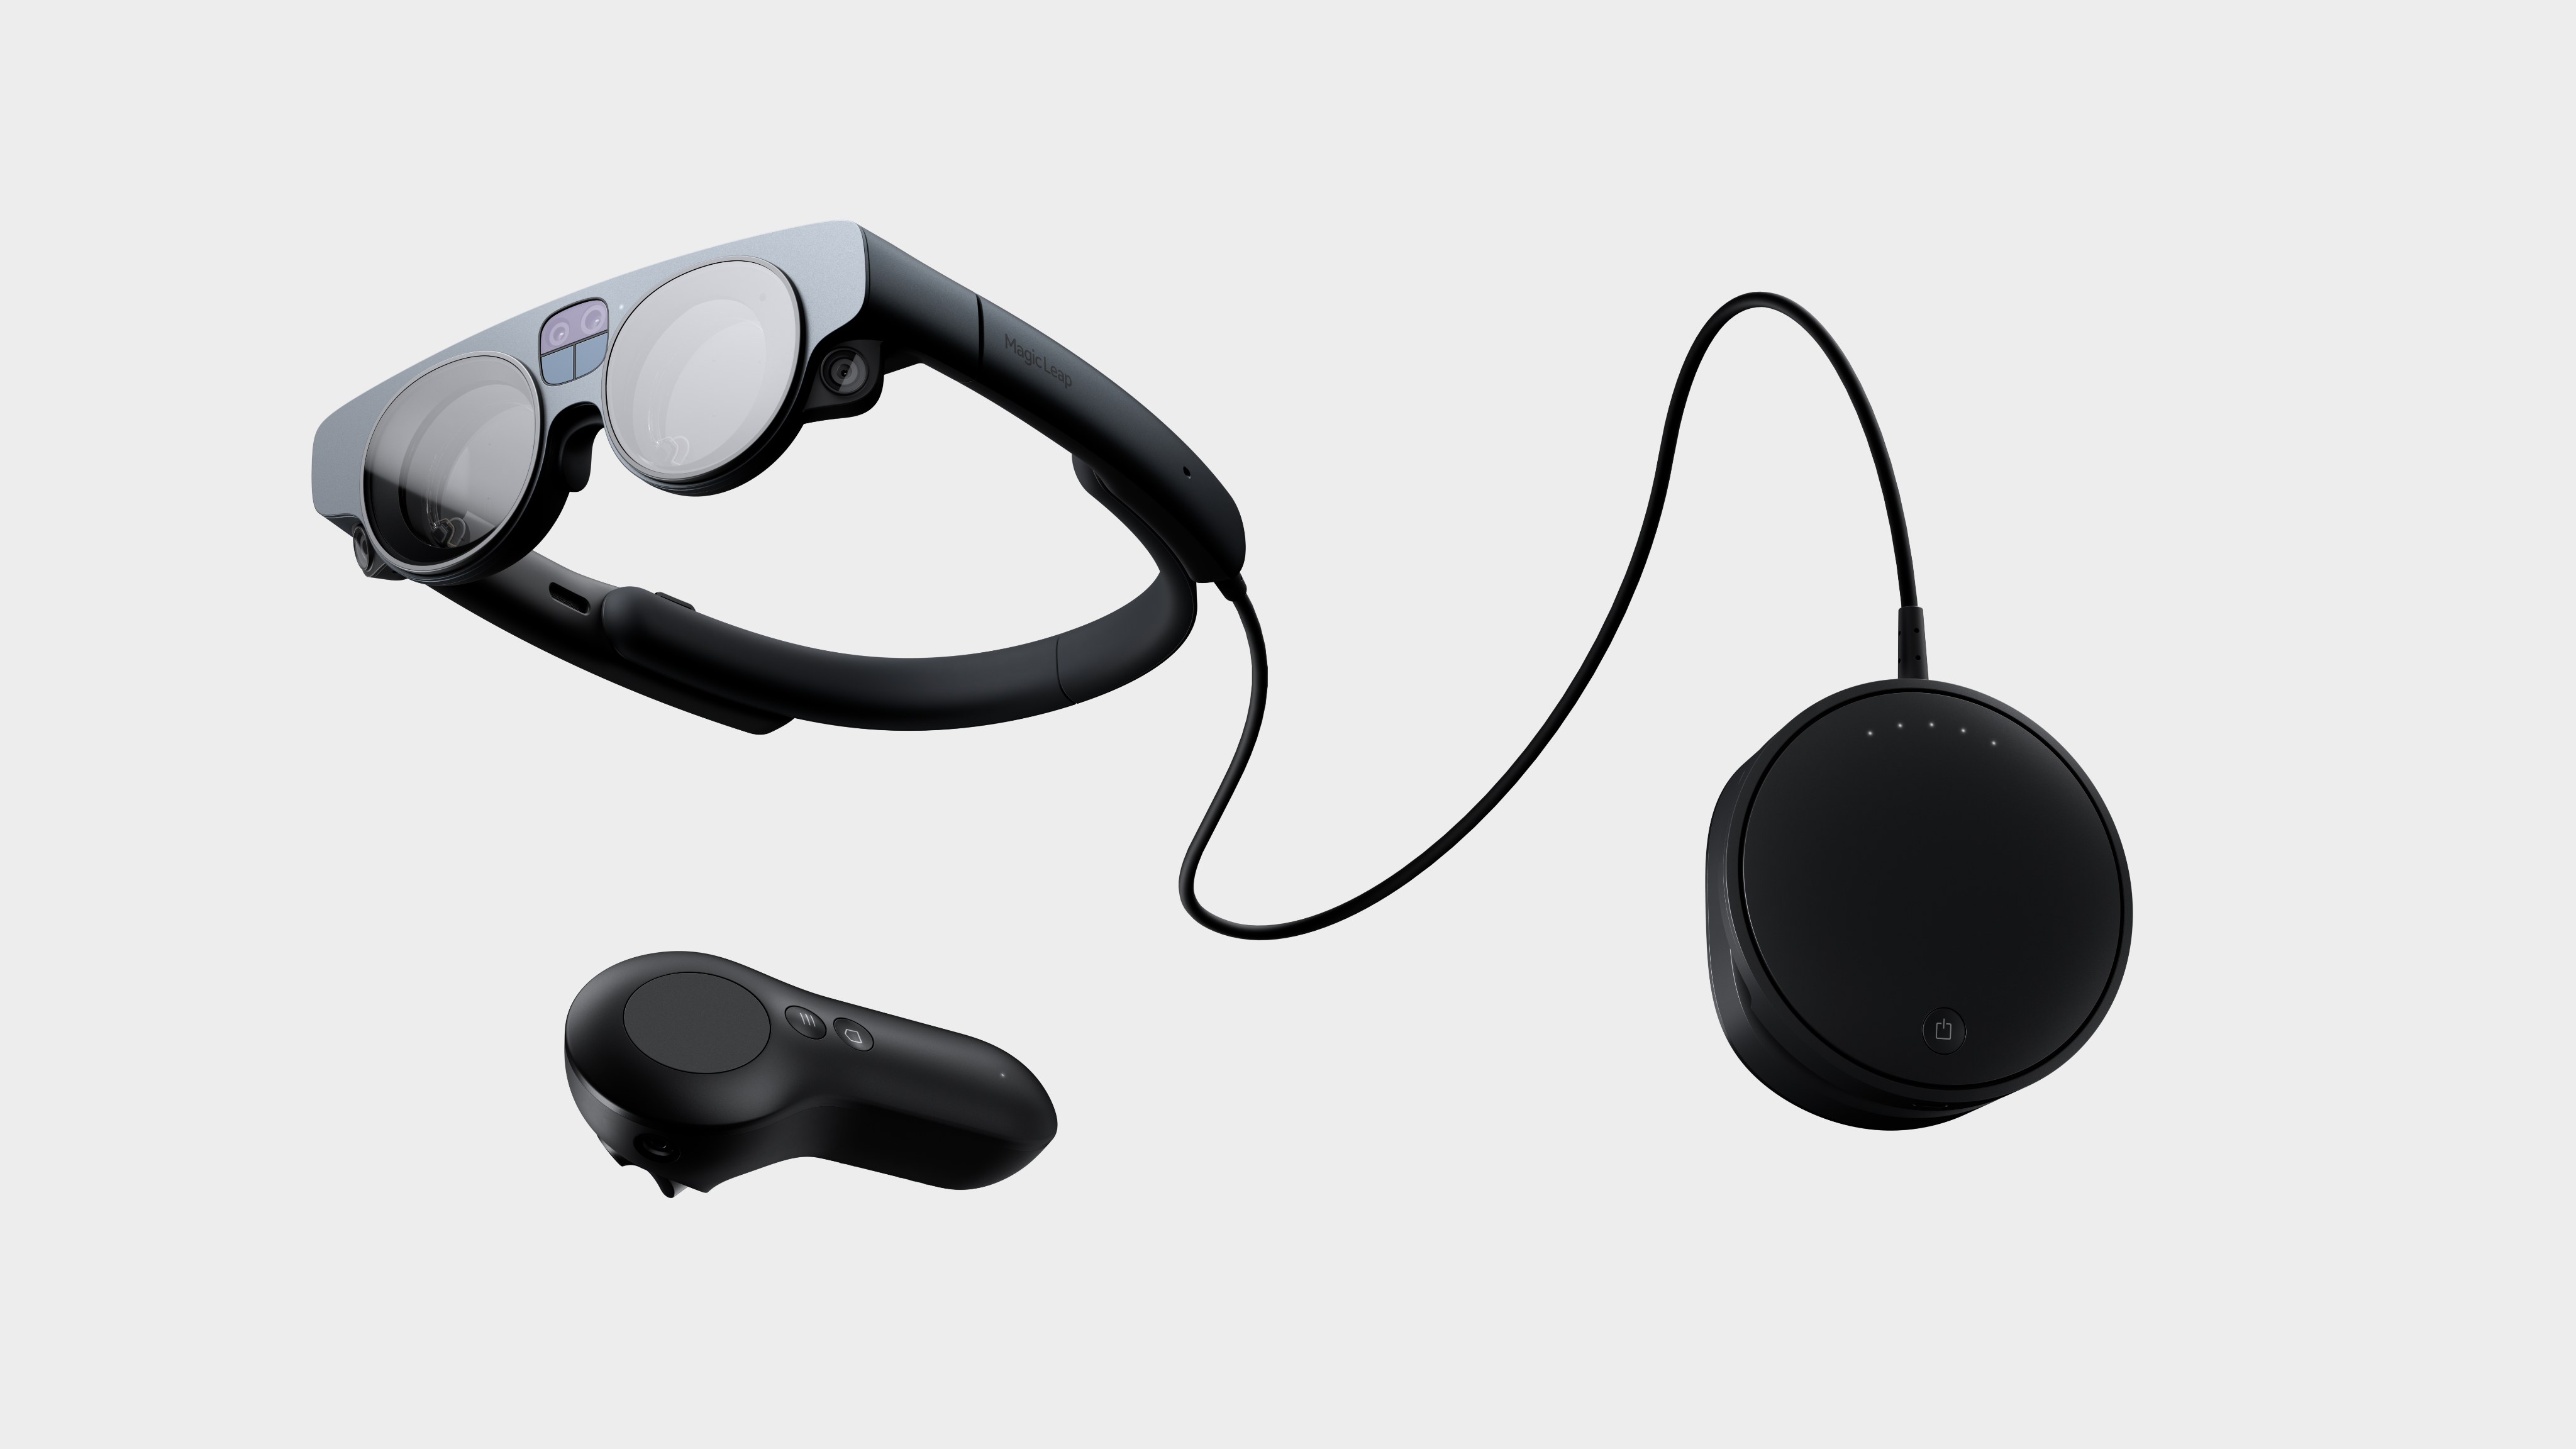 Image depicting hardware for the Magic Leap 2 headset